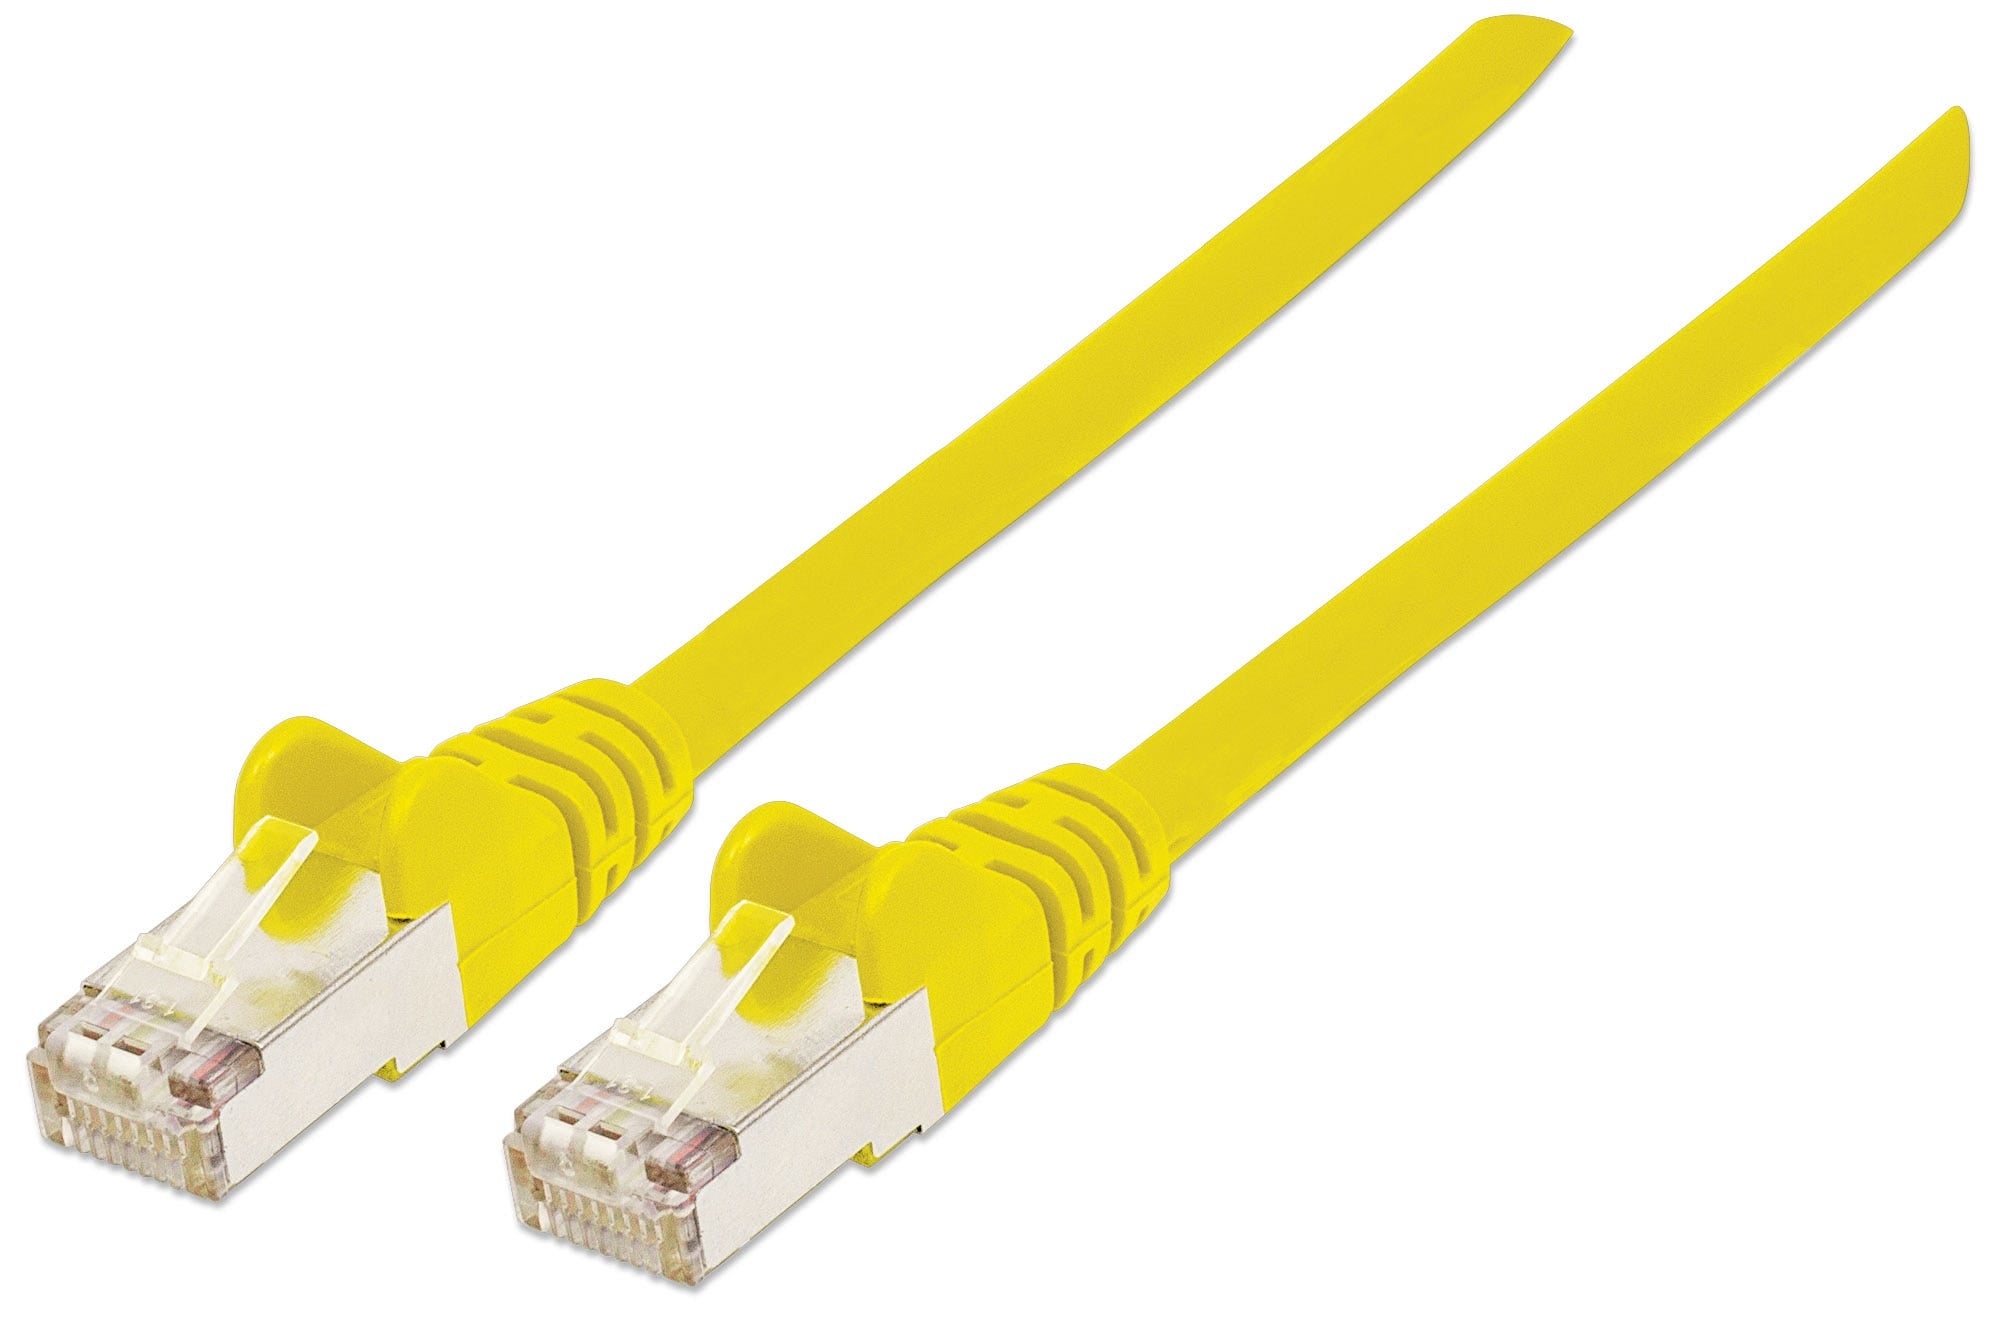 Intellinet Network Patch Cable, Cat6A, 2m, Yellow, Copper, S/FTP, LSOH / LSZH, PVC, RJ45, Gold Plated Contacts, Snagless, Booted, Lifetime Warranty, Polybag